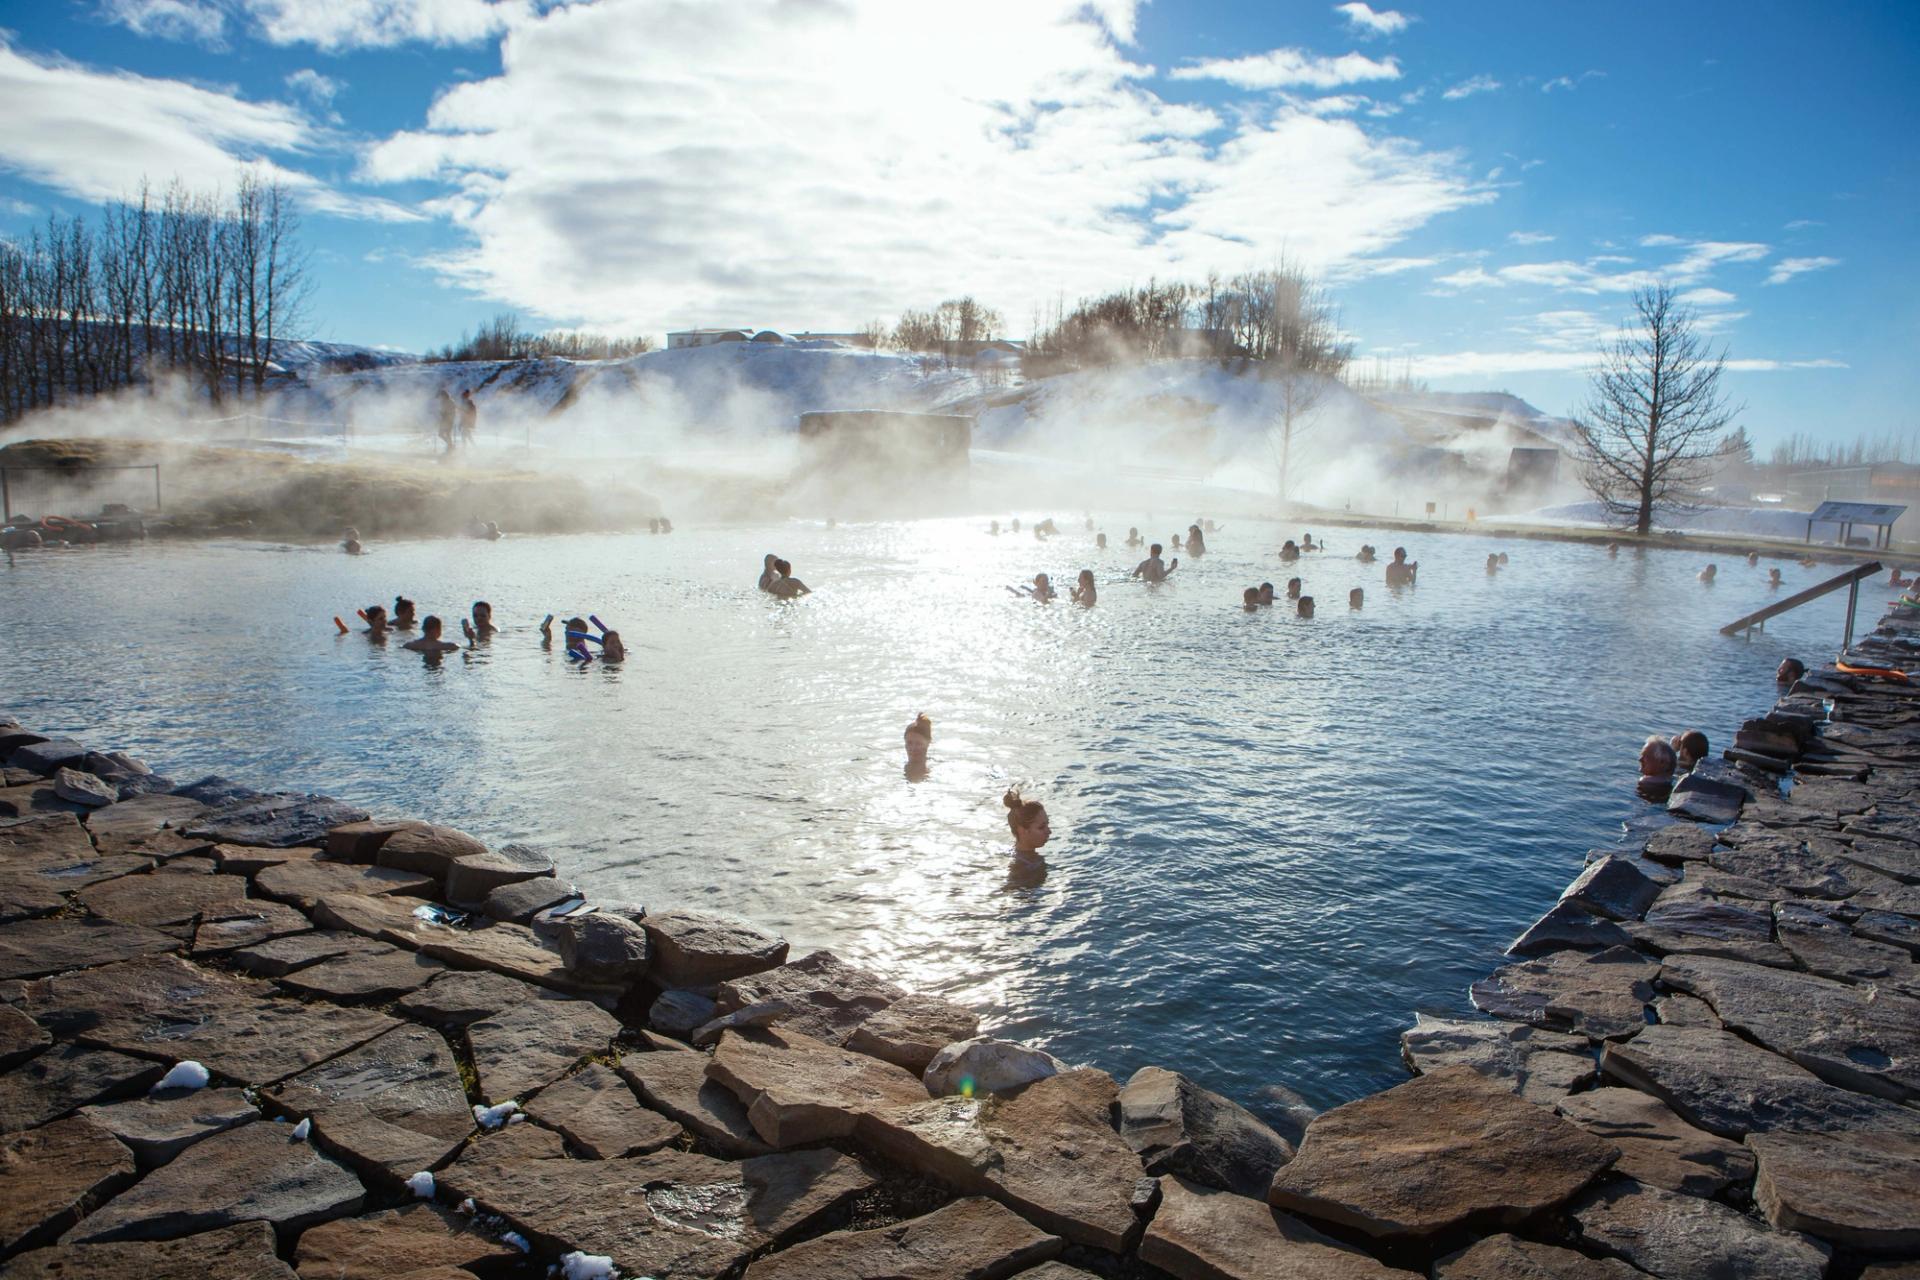 A natural hot springs in Iceland where people are swimming in warm water that has geothermal heat